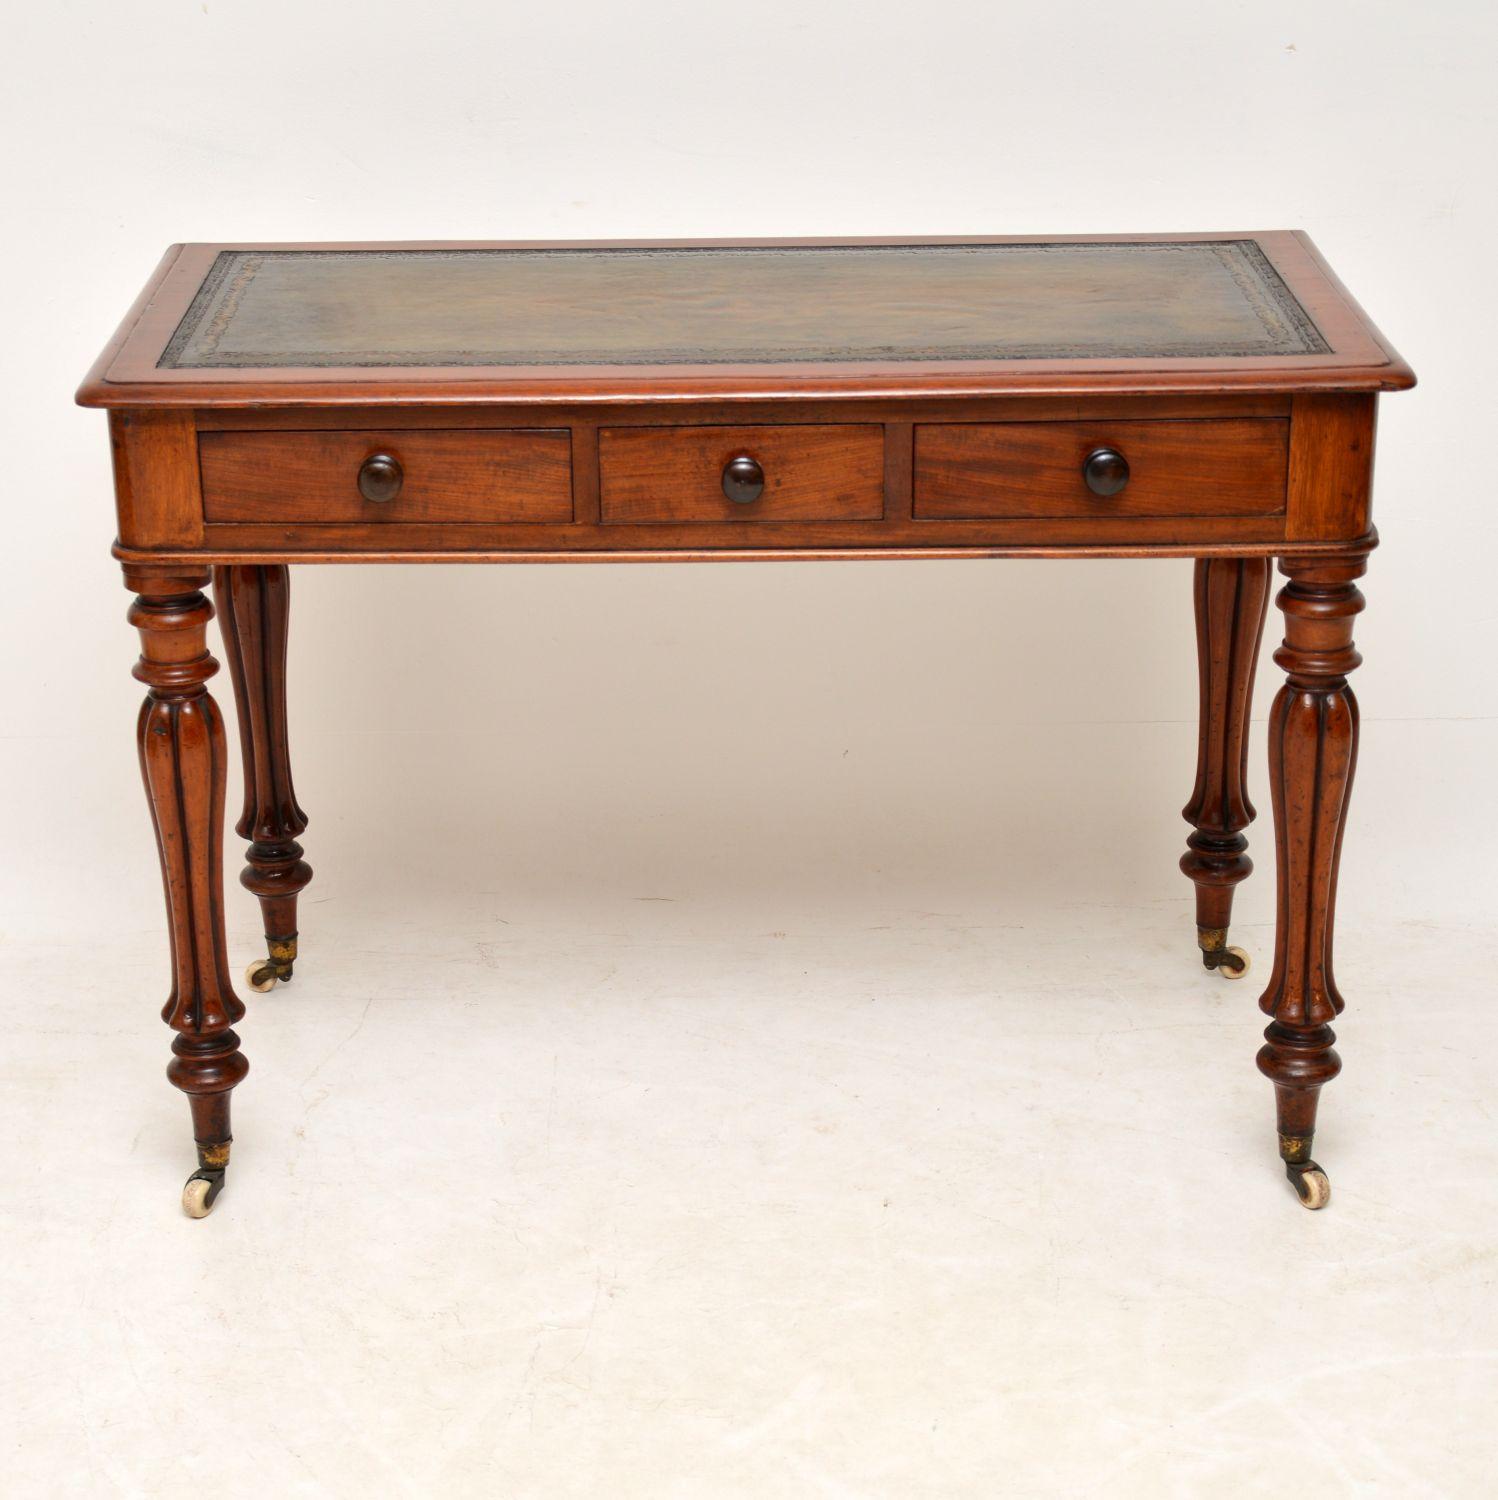 This antique William IV writing table is in wonderful original condition and is of very high quality. It has a polished back, three drawers on the front with turned bun handles and fine dovetails. The top has a hand colored tooled leather writing